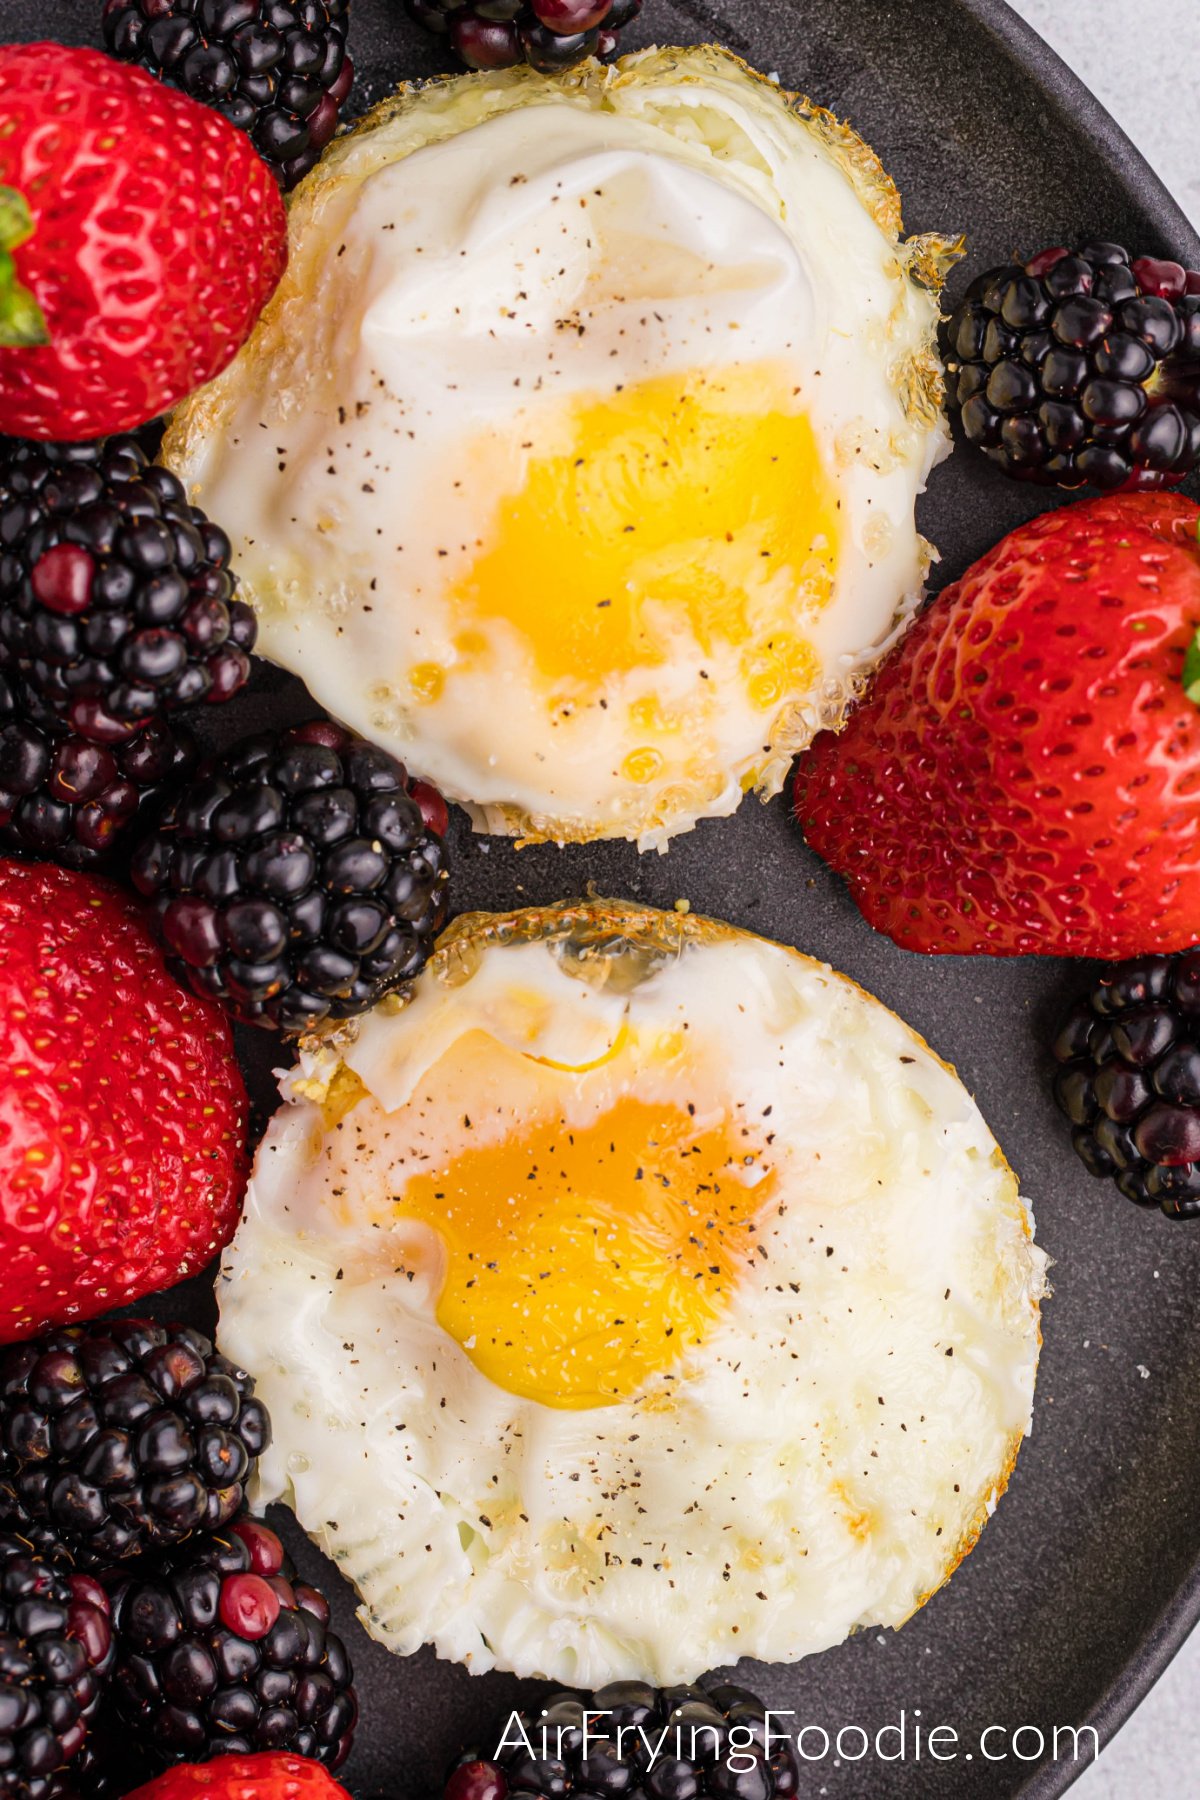 Air fryer fried eggs topped with salt and pepper and served on a plate with a side of fruit.